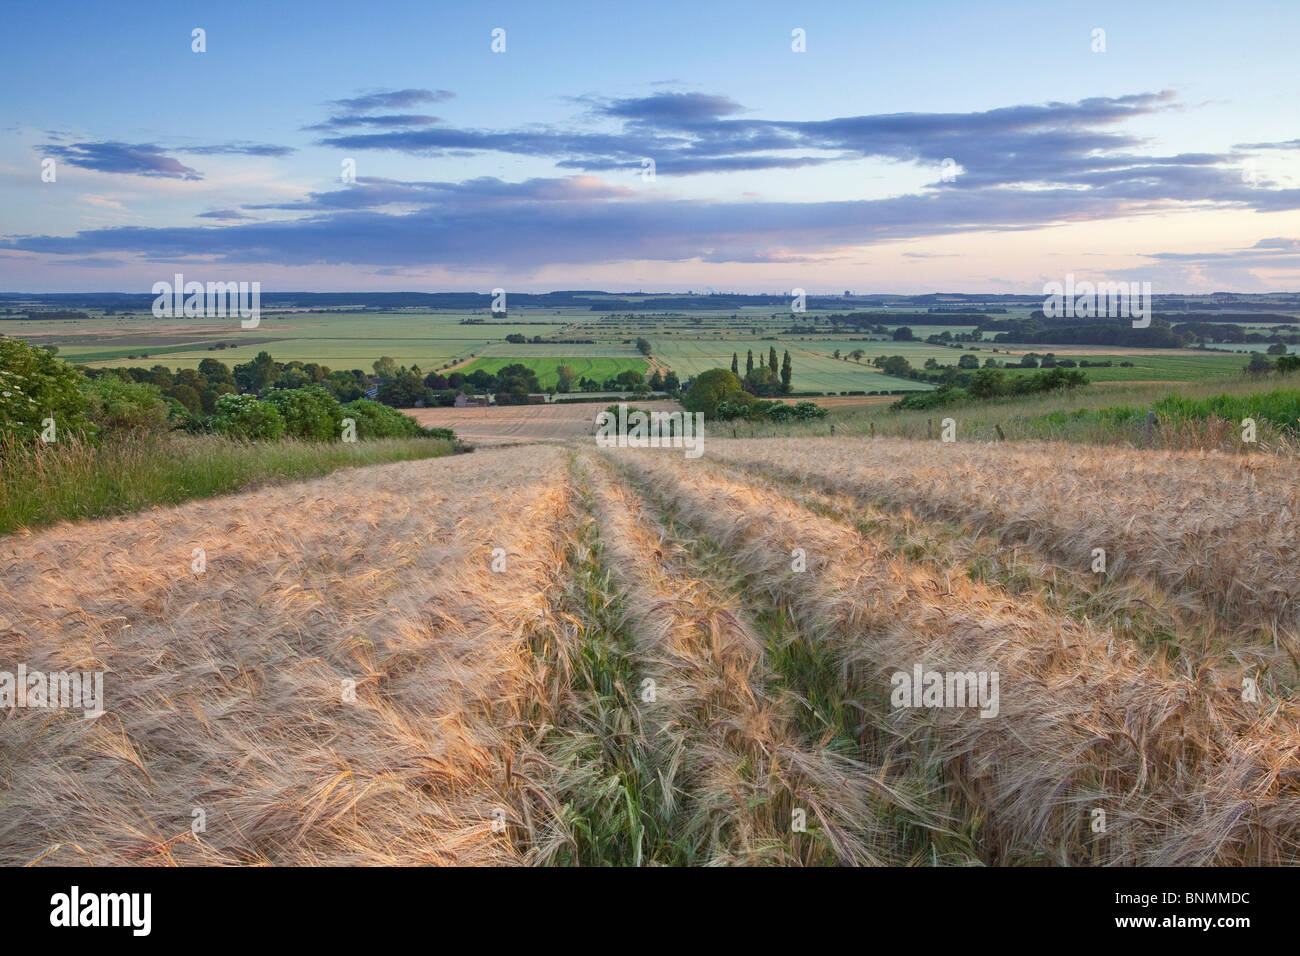 A view of the River Ancholme valley from a barley field on the Lincolnshire Wolds on a summer evening Stock Photo